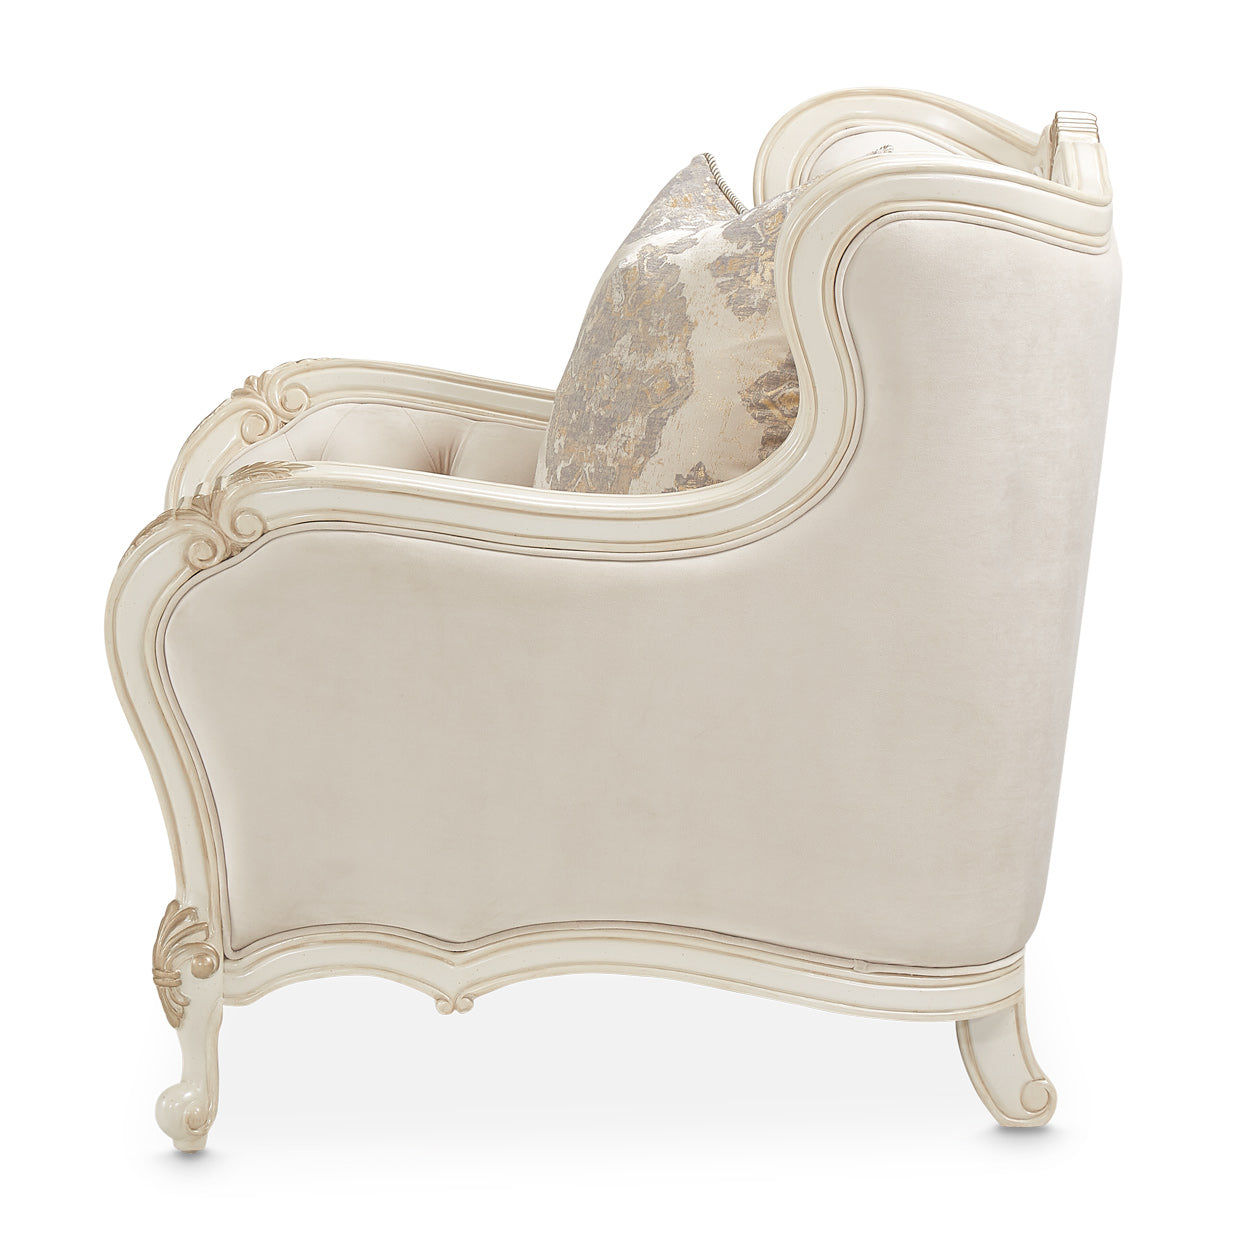 LAVELLE-CLASSIC PEARL Lavelle Chair And A Half Ivory Classic Pearl - Dream art Gallery